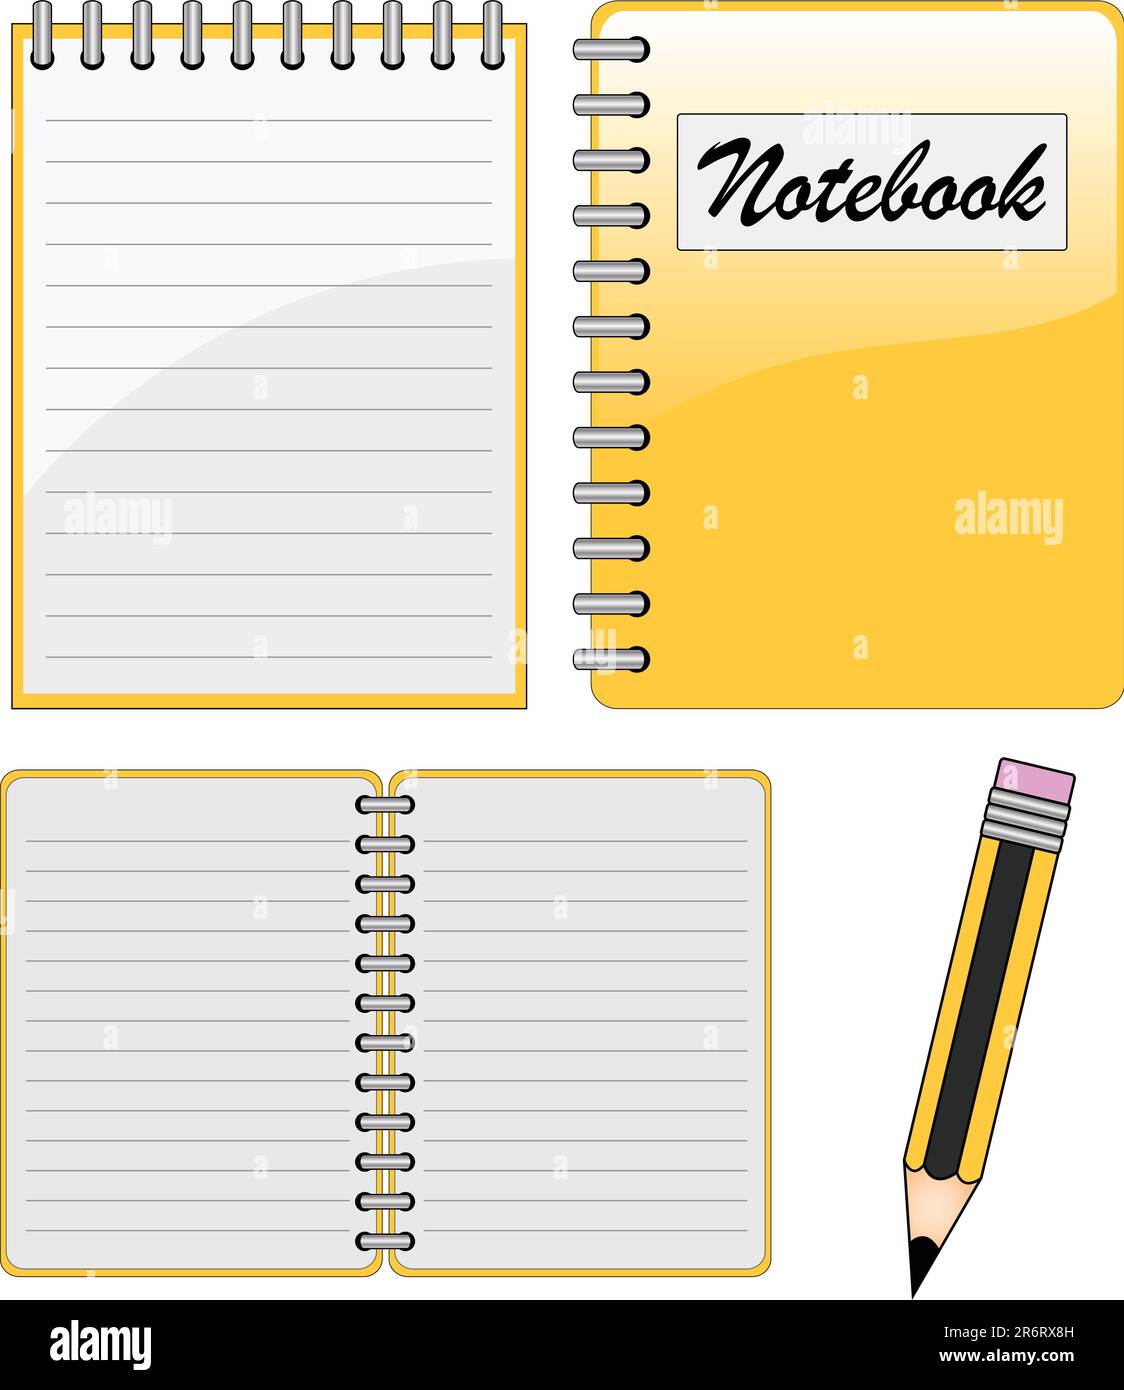 notebook, notepad and pencil - vector illustration Stock Vector